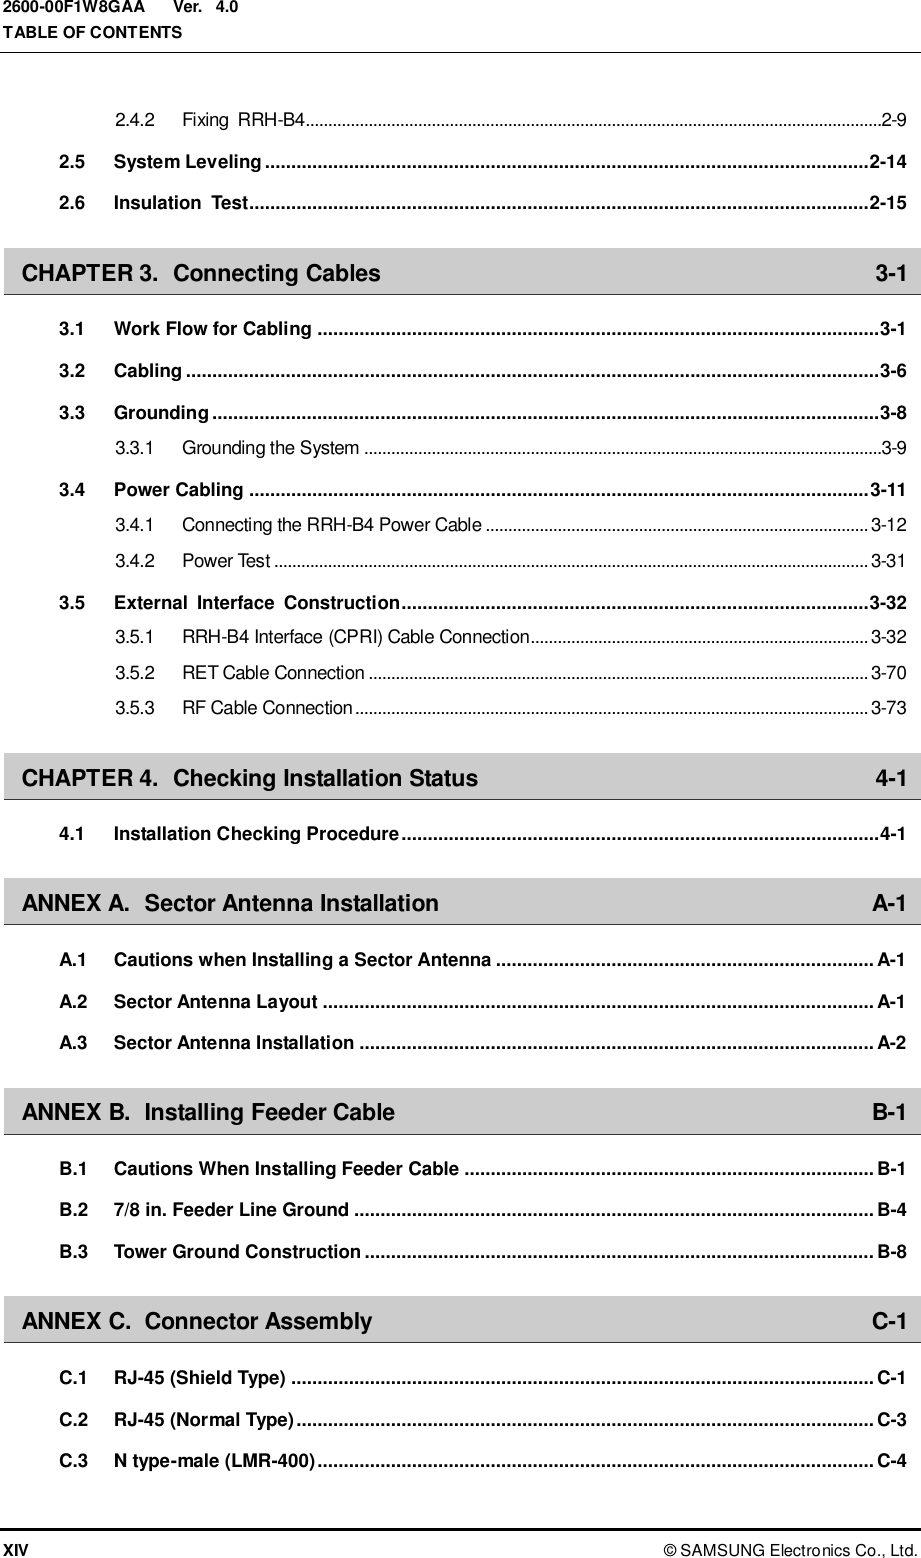  Ver.  TABLE OF CONTENTS XIV ©  SAMSUNG Electronics Co., Ltd. 2600-00F1W8GAA 4.0 2.4.2 Fixing  RRH-B4................................................................................................................................2-9 2.5 System Leveling ................................................................................................................... 2-14 2.6 Insulation  Test...................................................................................................................... 2-15 CHAPTER 3. Connecting Cables  3-1 3.1 Work Flow for Cabling ........................................................................................................... 3-1 3.2 Cabling .................................................................................................................................... 3-6 3.3 Grounding ............................................................................................................................... 3-8 3.3.1 Grounding the System ...................................................................................................................3-9 3.4 Power Cabling ...................................................................................................................... 3-11 3.4.1 Connecting the RRH-B4 Power Cable ..................................................................................... 3-12 3.4.2 Power Test .................................................................................................................................... 3-31 3.5 External  Interface  Construction......................................................................................... 3-32 3.5.1 RRH-B4 Interface (CPRI) Cable Connection........................................................................... 3-32 3.5.2 RET Cable Connection ............................................................................................................... 3-70 3.5.3 RF Cable Connection .................................................................................................................. 3-73 CHAPTER 4. Checking Installation Status  4-1 4.1 Installation Checking Procedure ........................................................................................... 4-1 ANNEX A. Sector Antenna Installation  A-1 A.1 Cautions when Installing a Sector Antenna ........................................................................ A-1 A.2 Sector Antenna Layout ......................................................................................................... A-1 A.3 Sector Antenna Installation .................................................................................................. A-2 ANNEX B. Installing Feeder Cable  B-1 B.1 Cautions When Installing Feeder Cable .............................................................................. B-1 B.2 7/8 in. Feeder Line Ground ................................................................................................... B-4 B.3 Tower Ground Construction ................................................................................................. B-8 ANNEX C. Connector Assembly  C-1 C.1 RJ-45 (Shield Type) ............................................................................................................... C-1 C.2 RJ-45 (Normal Type) .............................................................................................................. C-3 C.3 N type-male (LMR-400) .......................................................................................................... C-4 